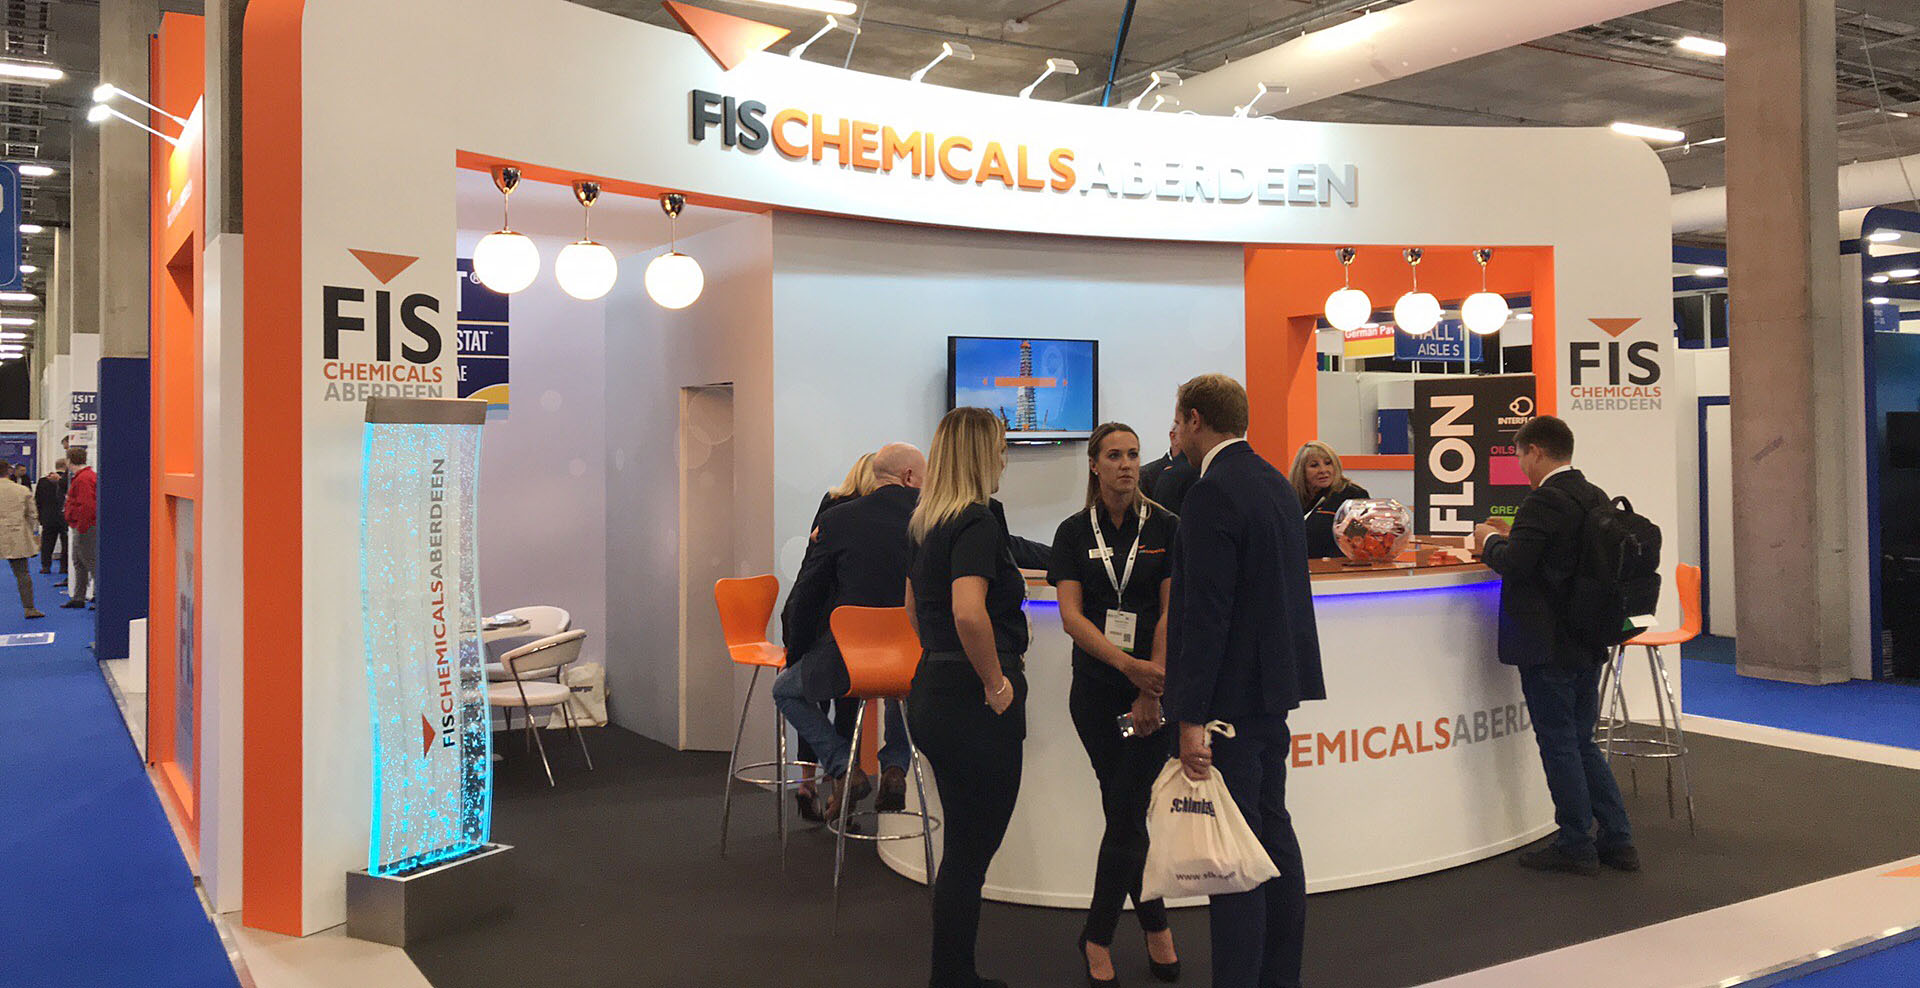 FIS Chemicals stand at Offshore Europe